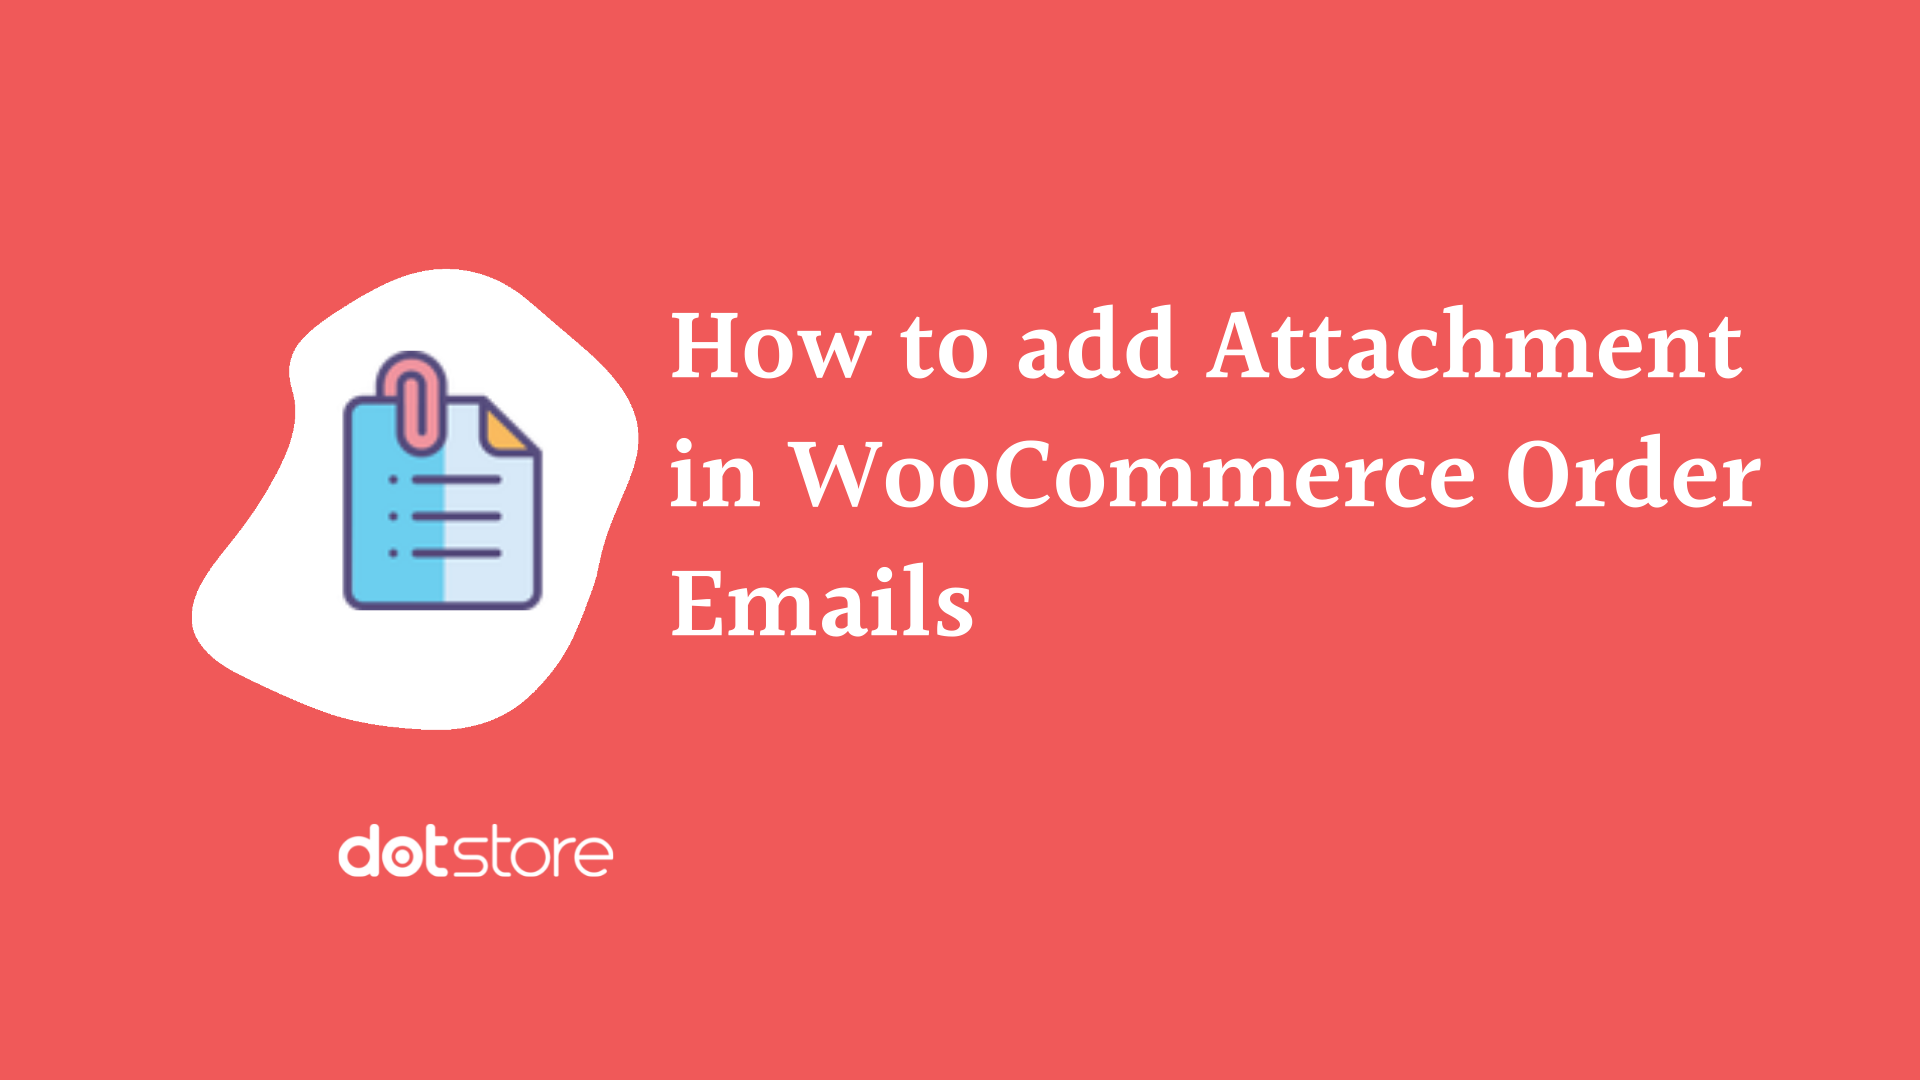 How to add an Attachment in WooCommerce Order Emails